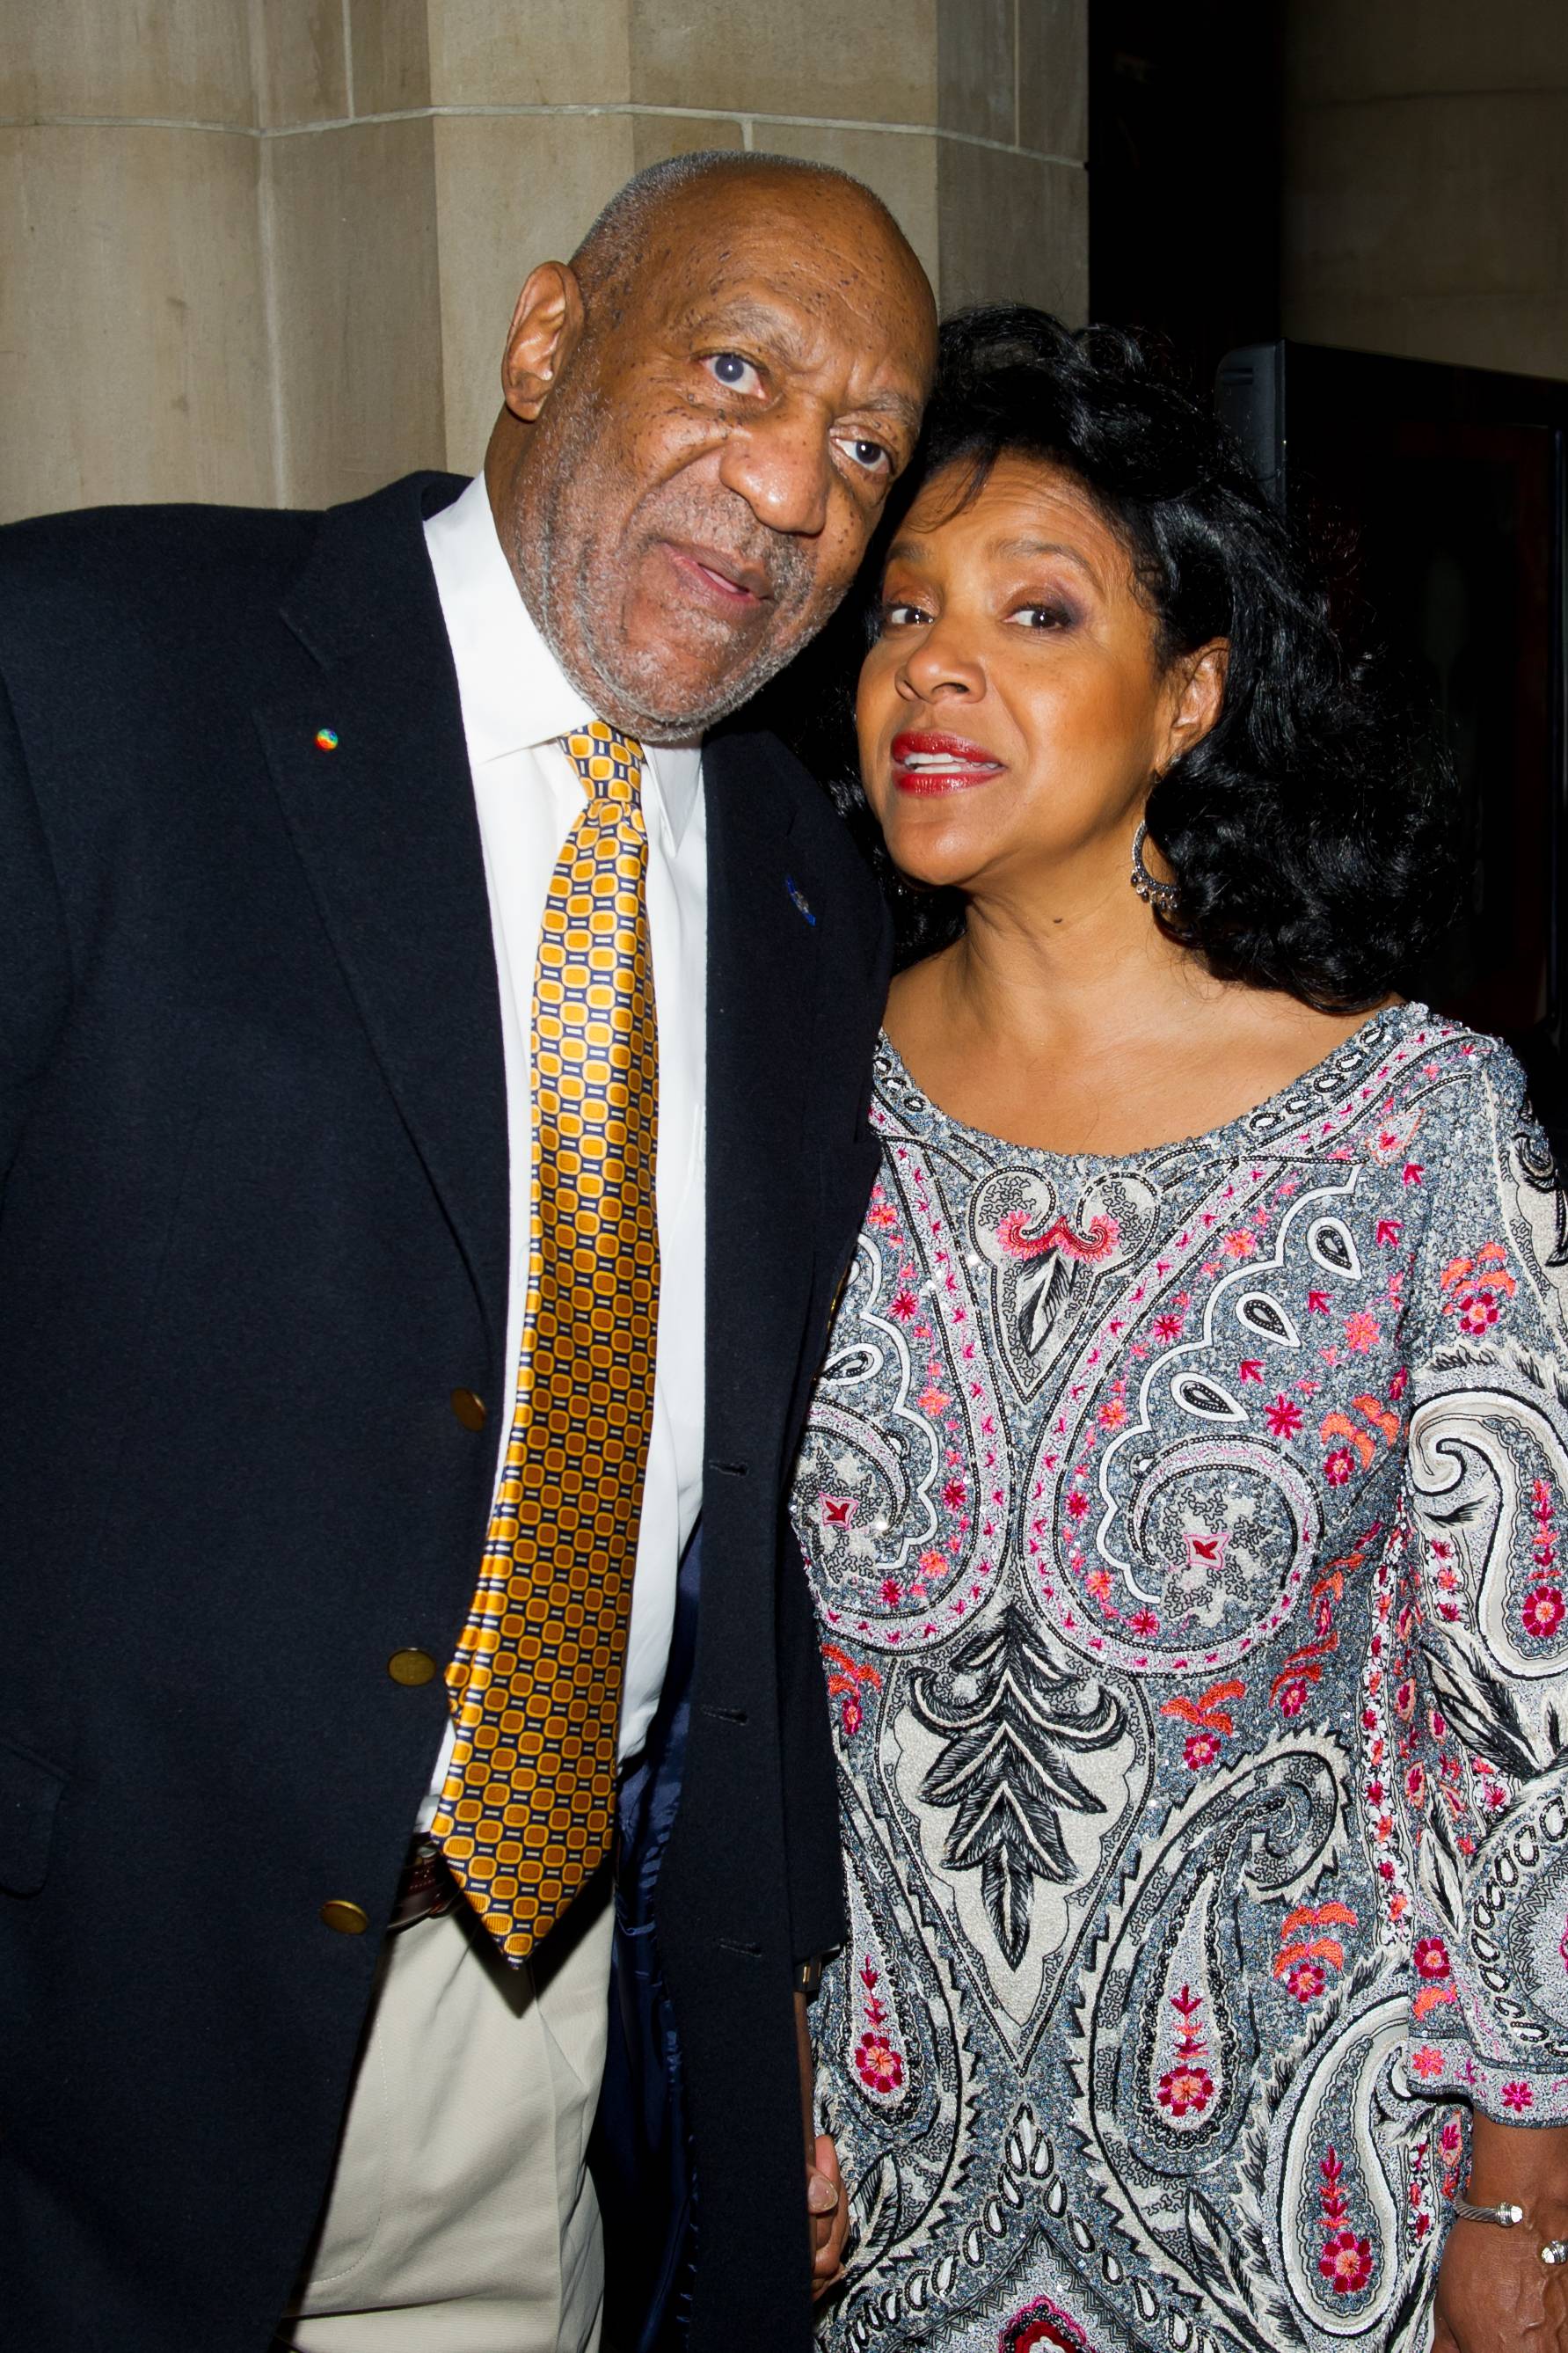 Bill Cosby and Phylicia Rashad on BET Buzz 2021